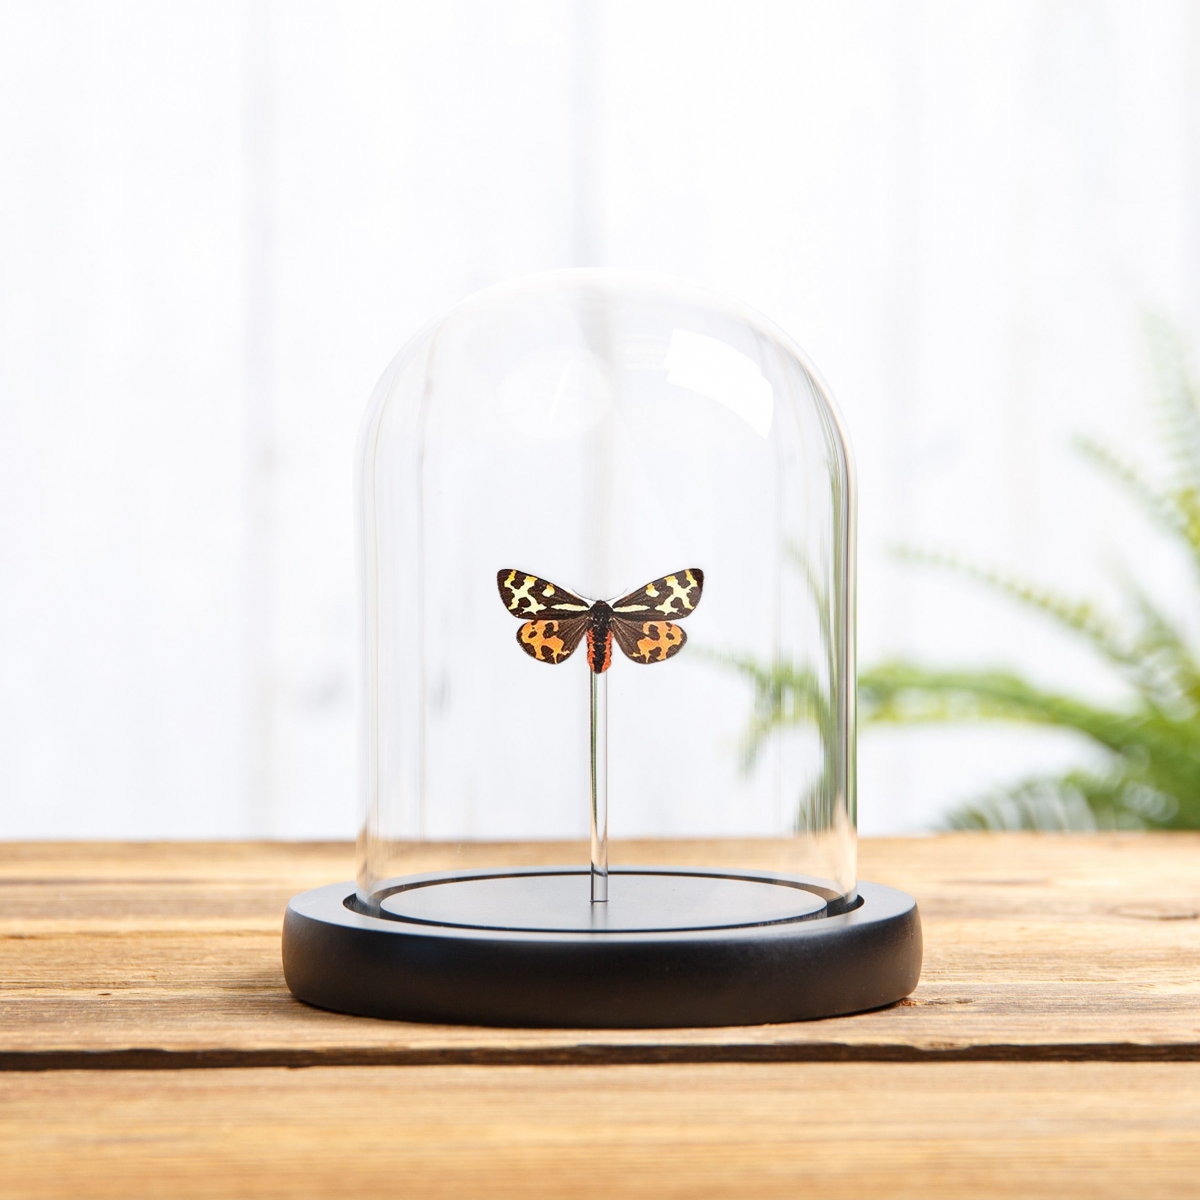 Minibeast Wood Tiger Moth in Glass Dome with Wooden Base (Parasemia plantaginis)